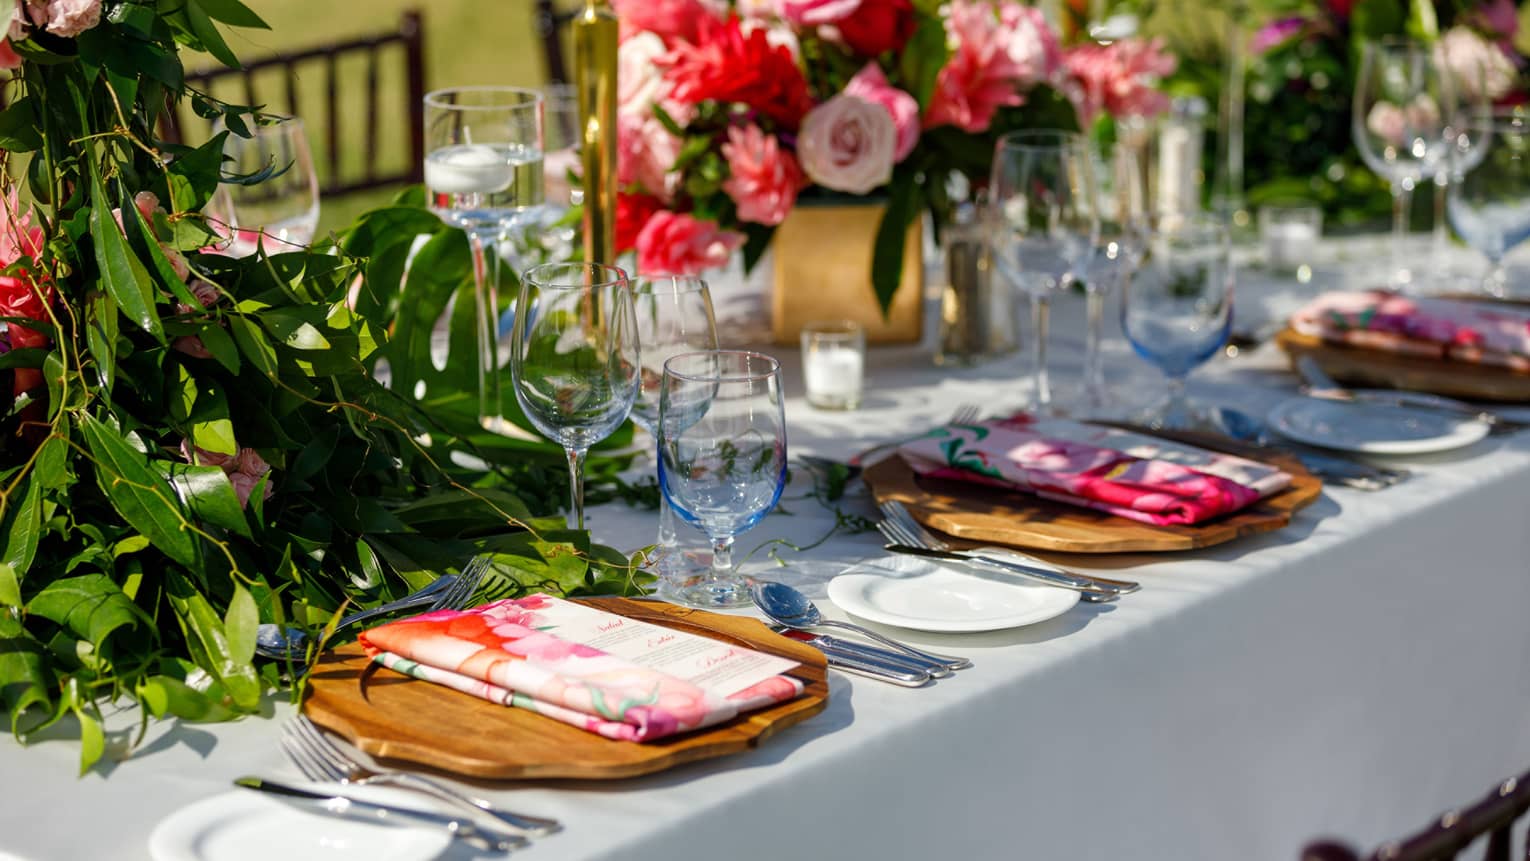 Vibrant table setting with wooden chargers, floral napkins, glassware, pink floral arrangements